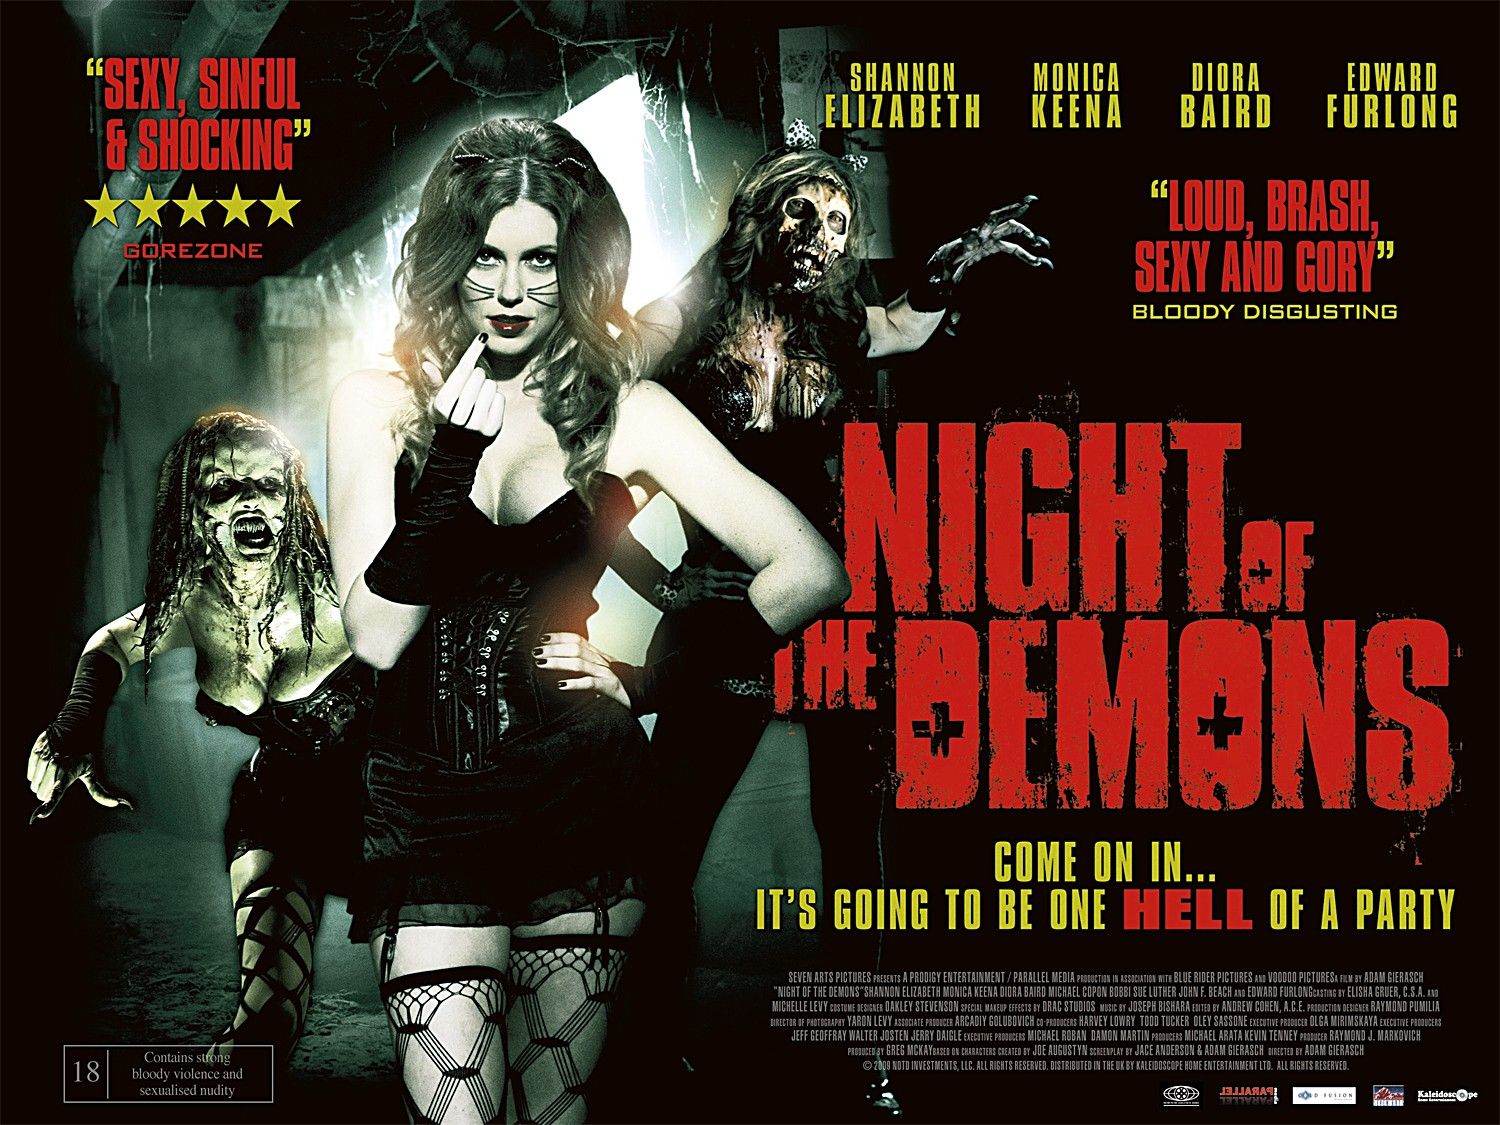 Extra Large Movie Poster Image for Night of the Demons 